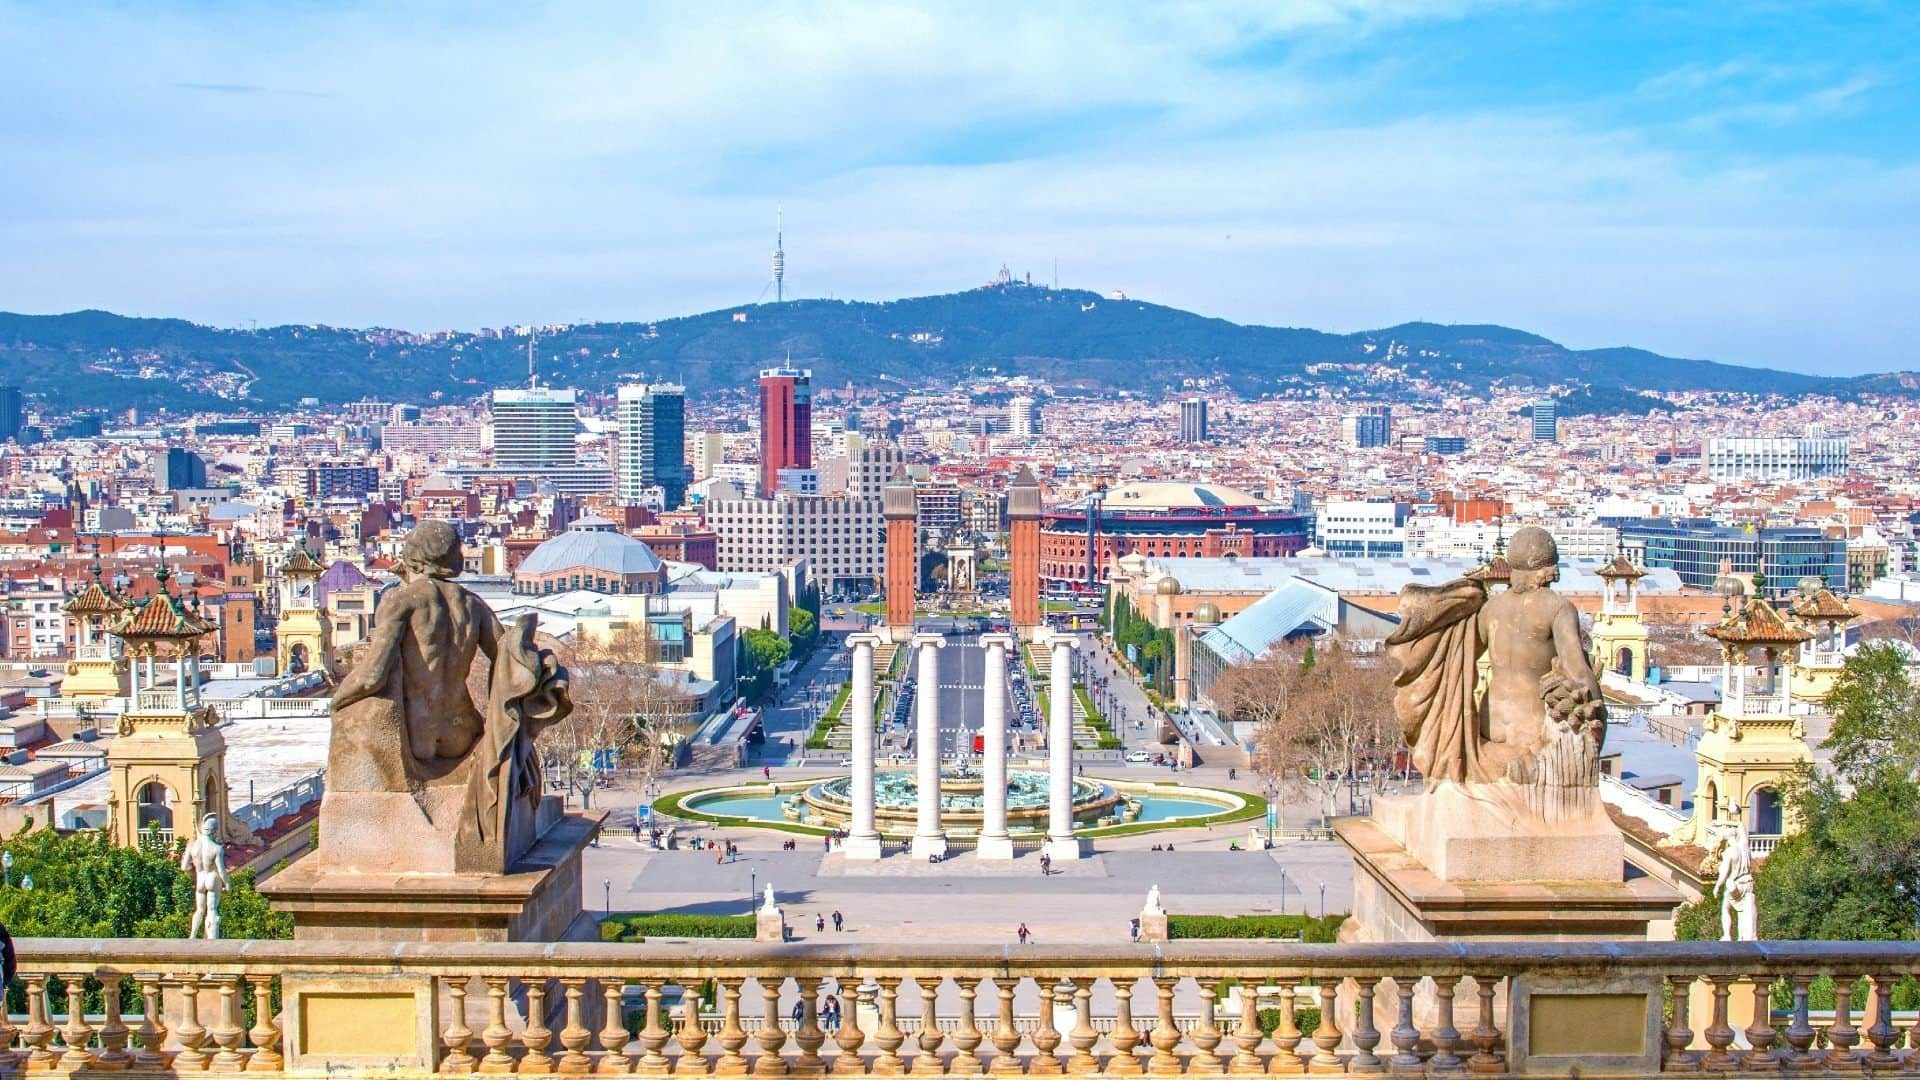 Barcelona Highlights Sightseeing and Gothic Quarter Small Group Half Day Tour - In out Barcelona Tours